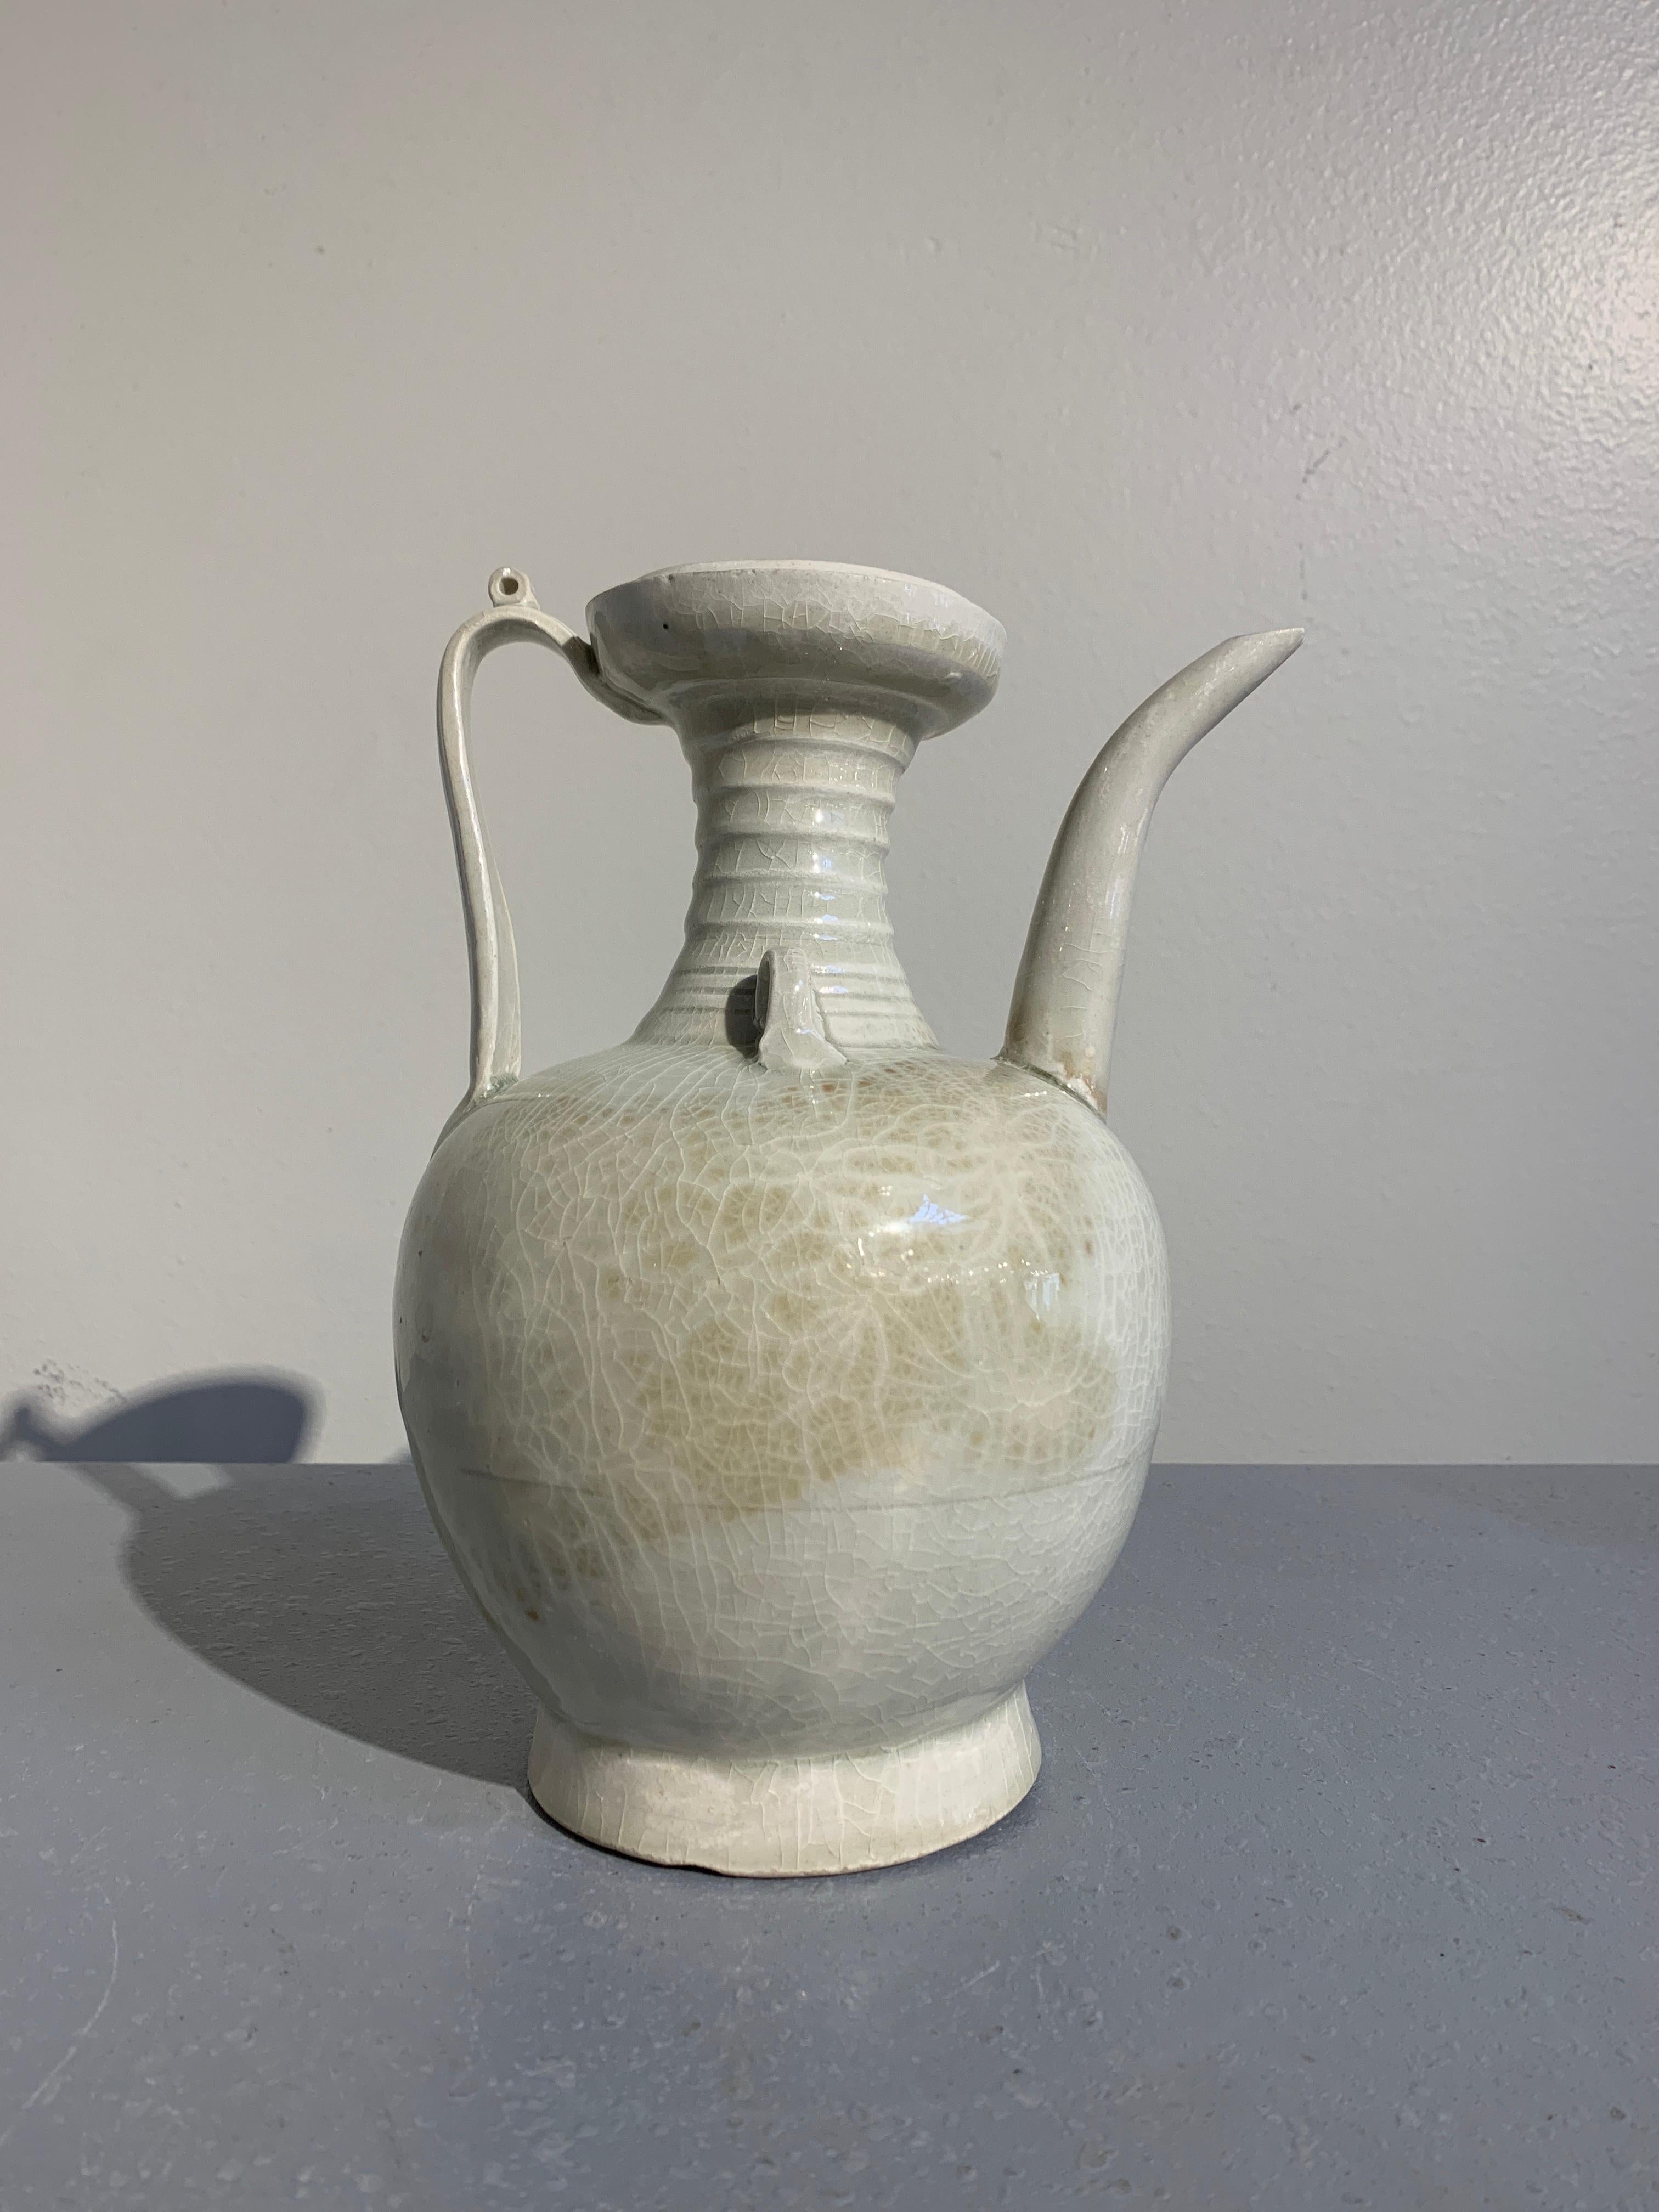 Porcelain Chinese Qingbai Glazed Ewer, Southern Song Dynasty, 13th Century